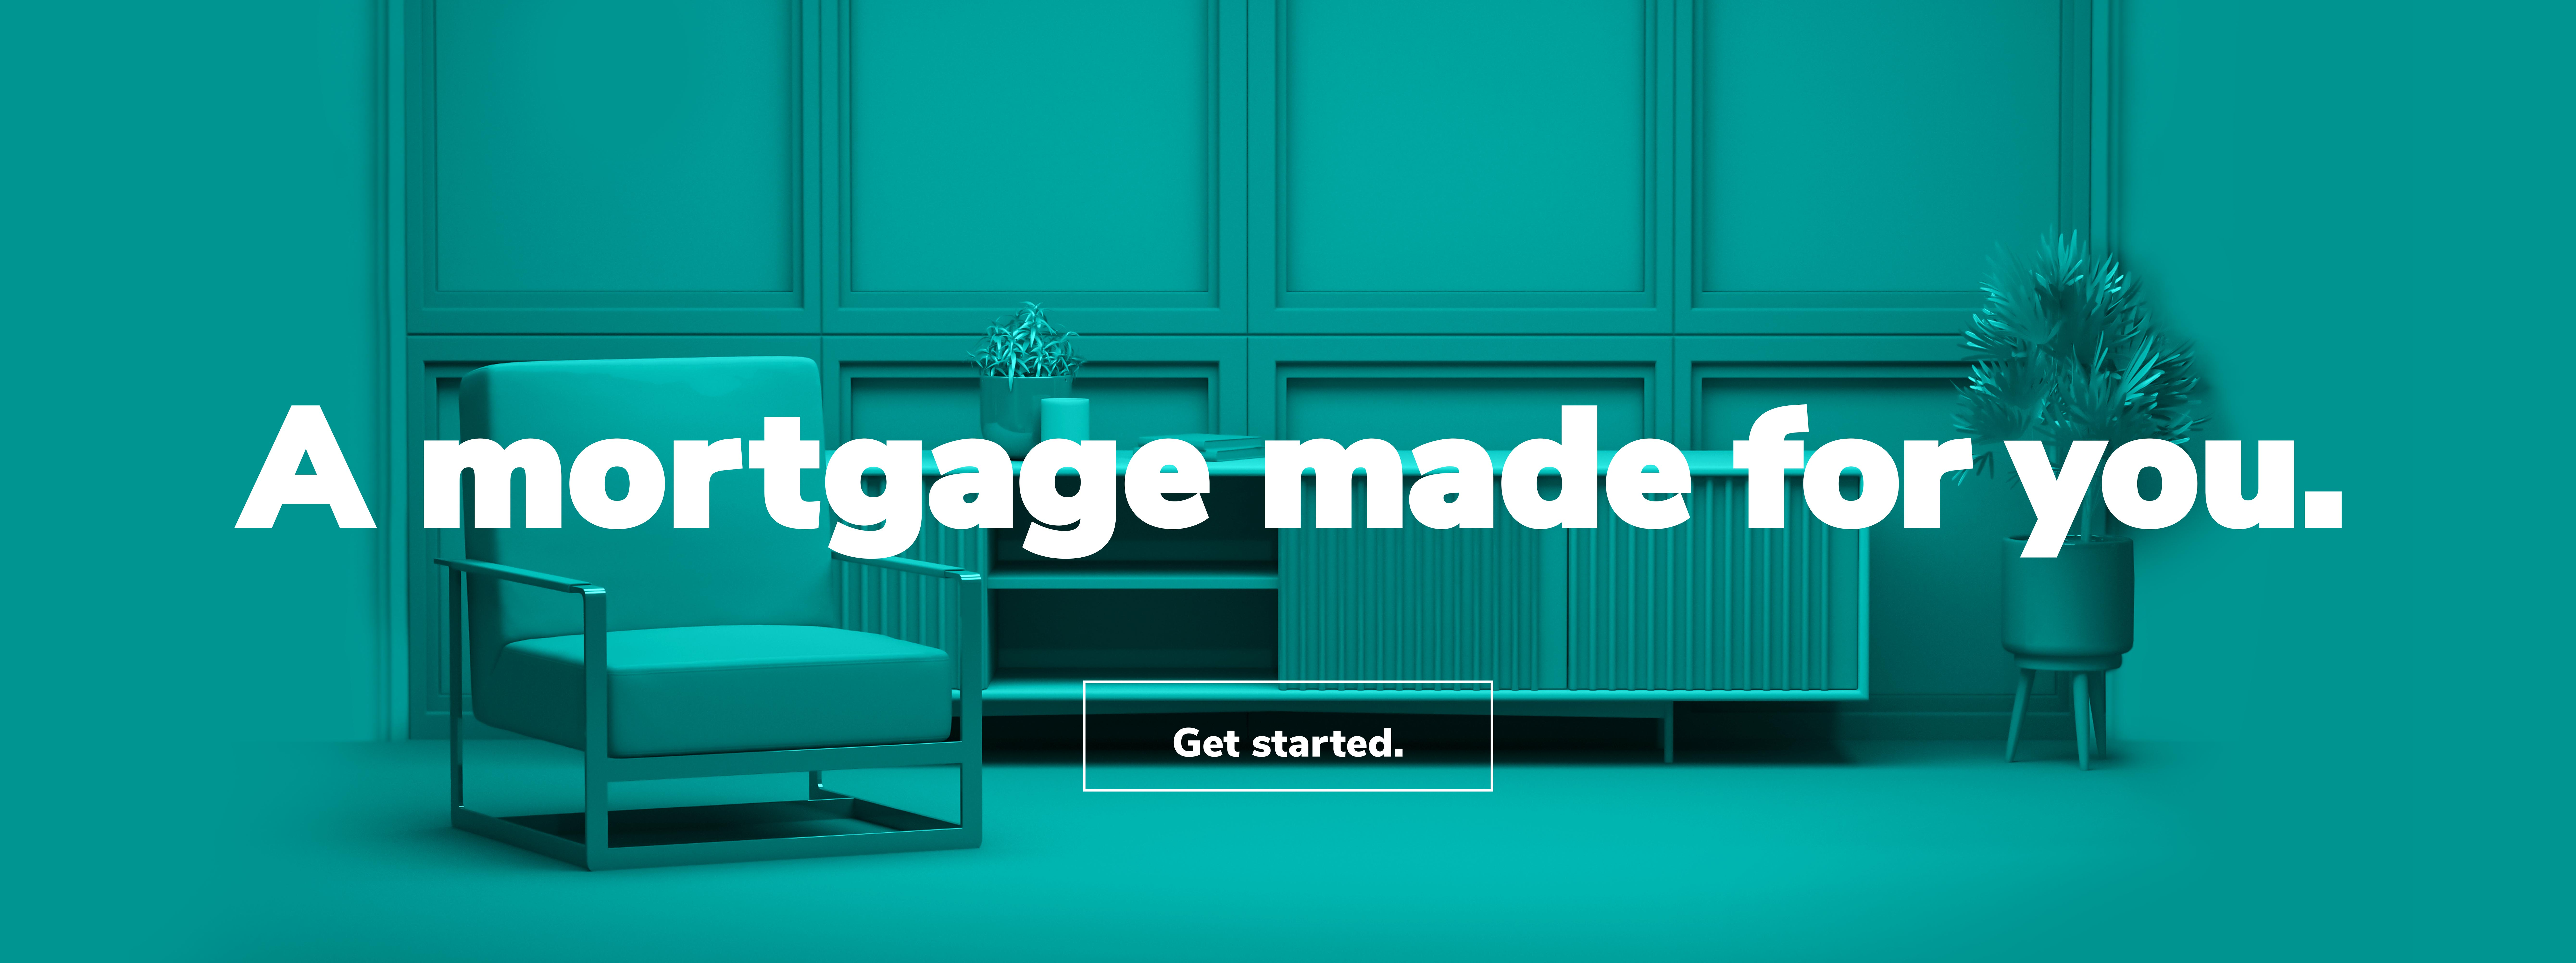 A mortgage made for you. Get Started